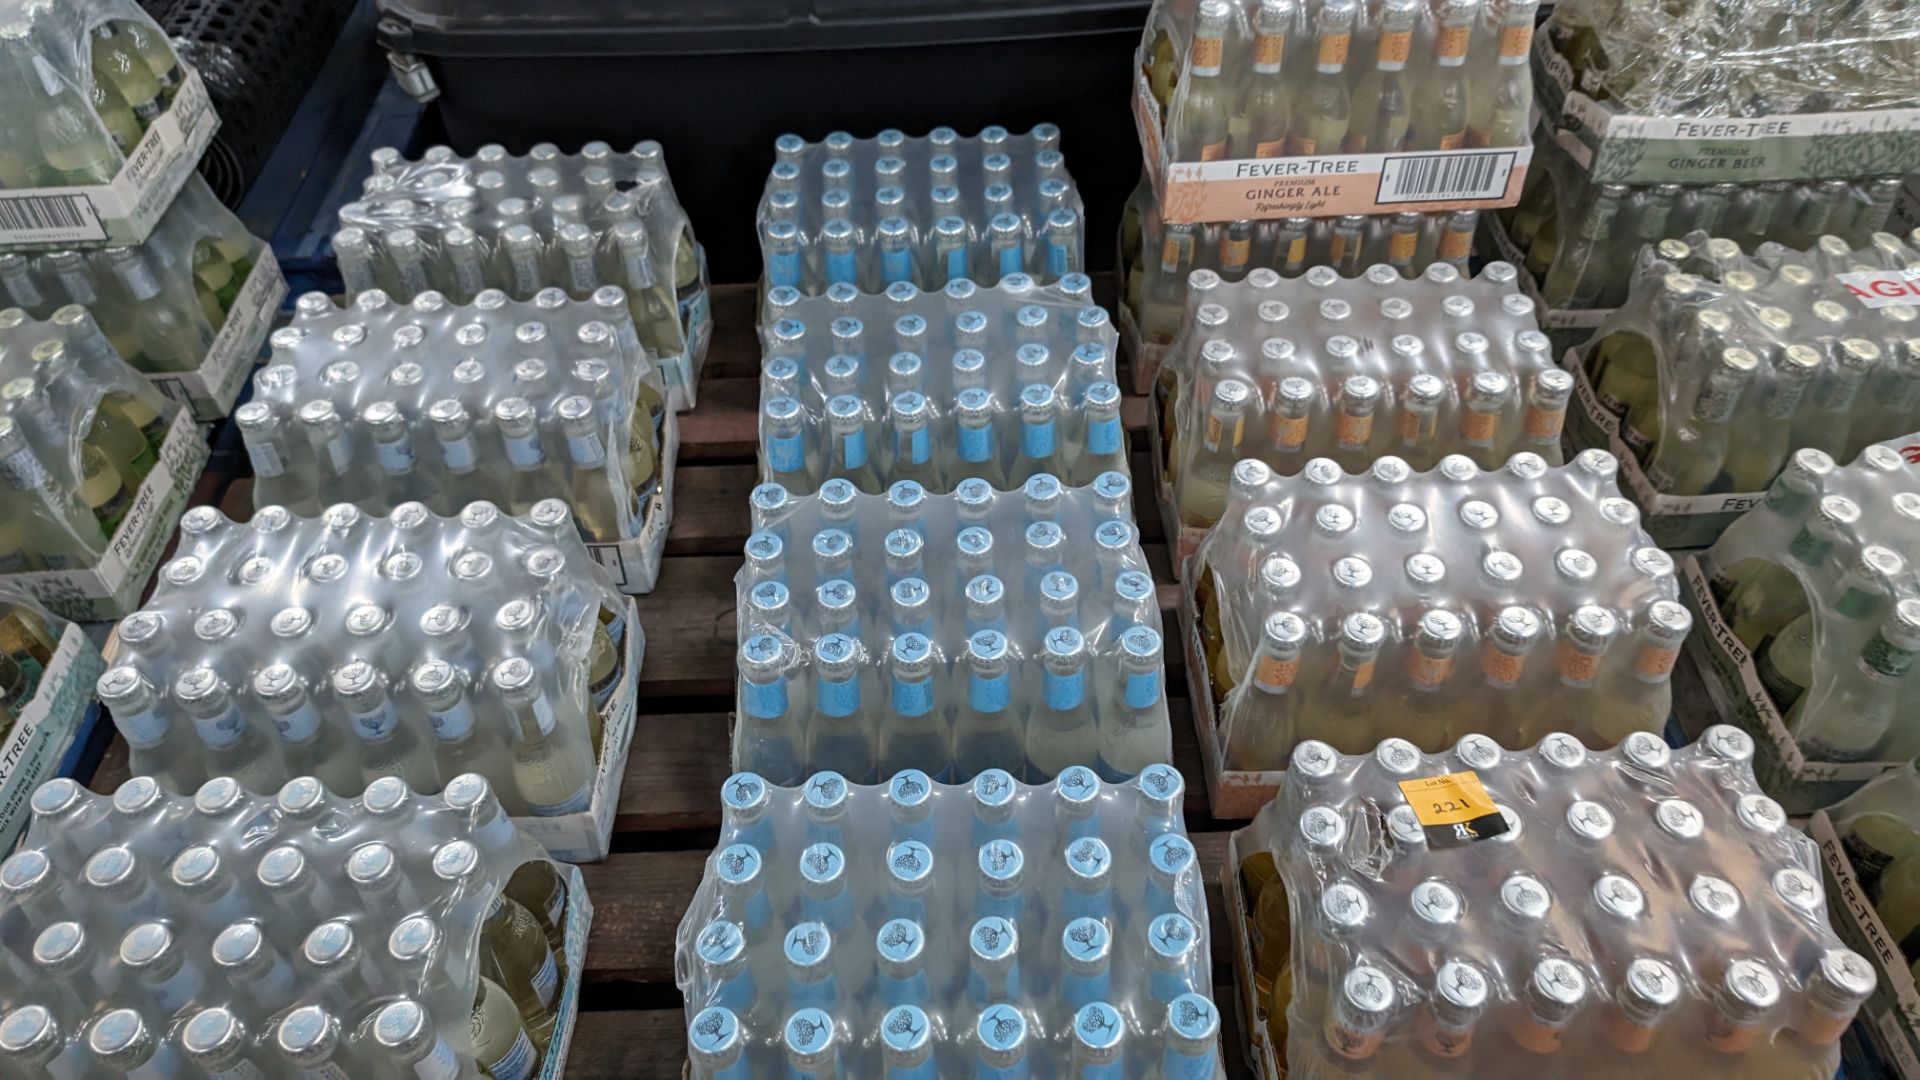 The contents of a pallet of Fever-Tree tonic water comprising 13 trays. NB: The Fever-Tree tonic w - Image 4 of 6